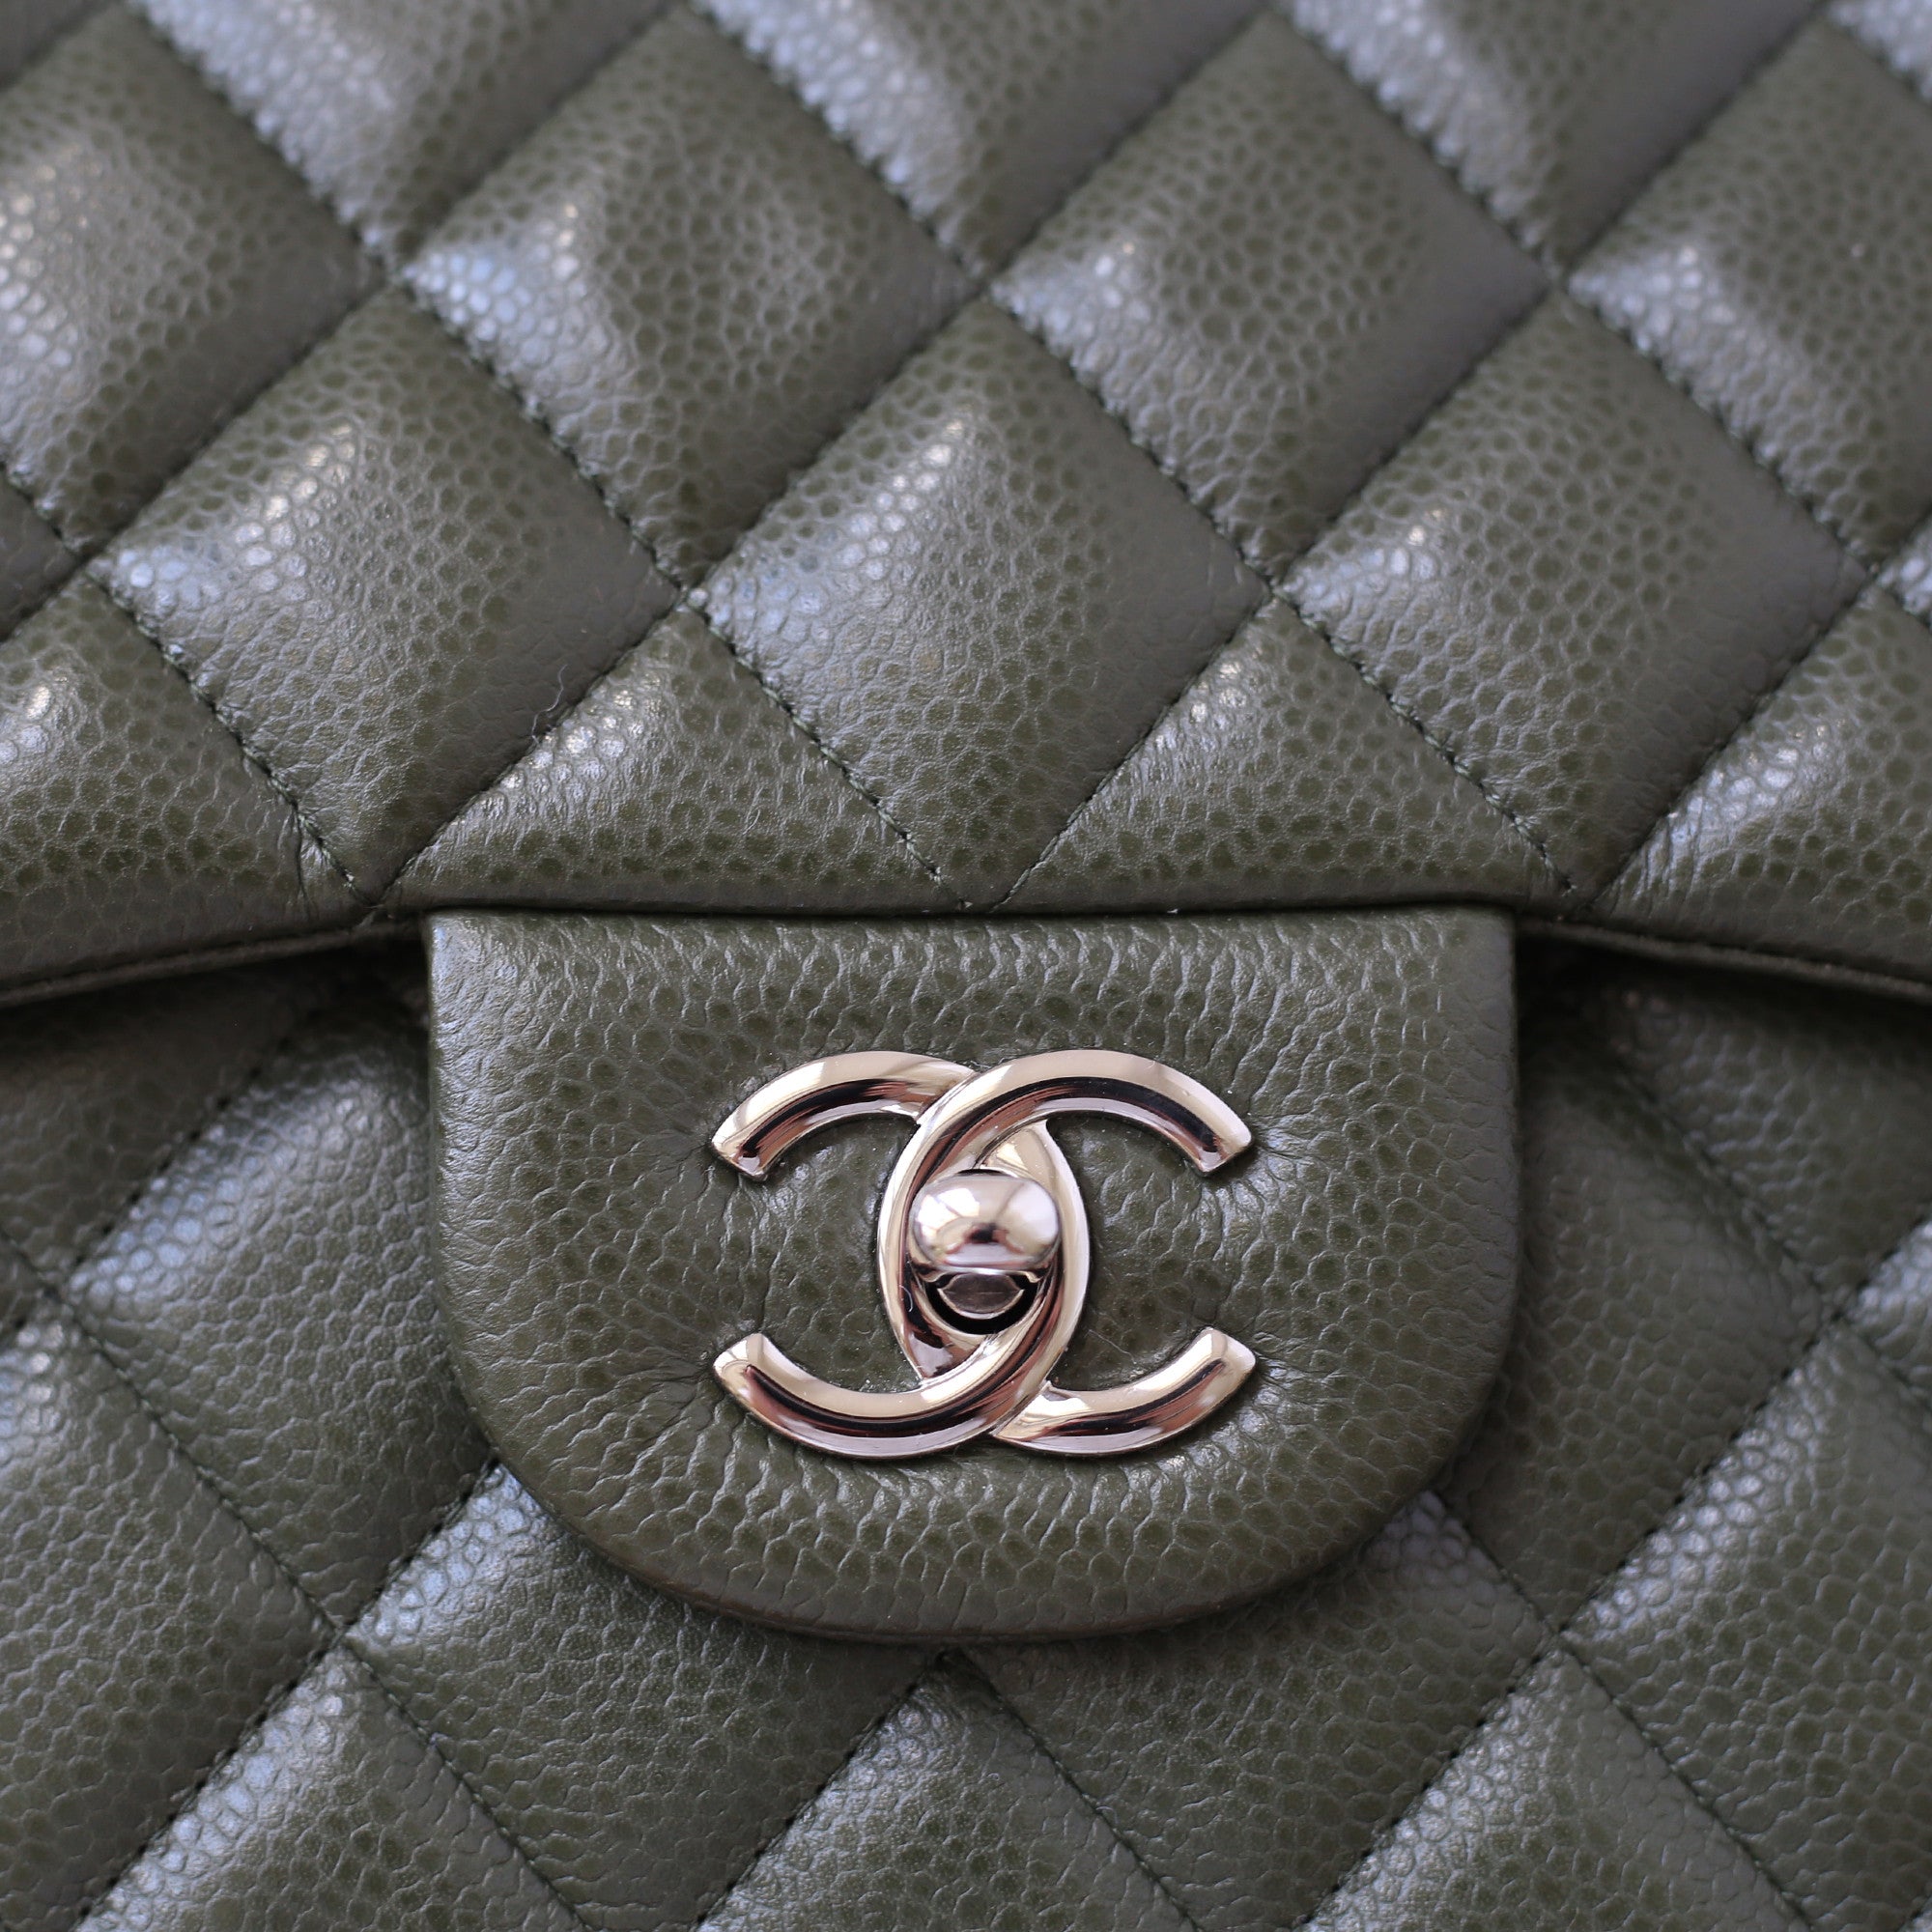 Chanel, Caviar SS16 Quilted Filigree Flap Bag